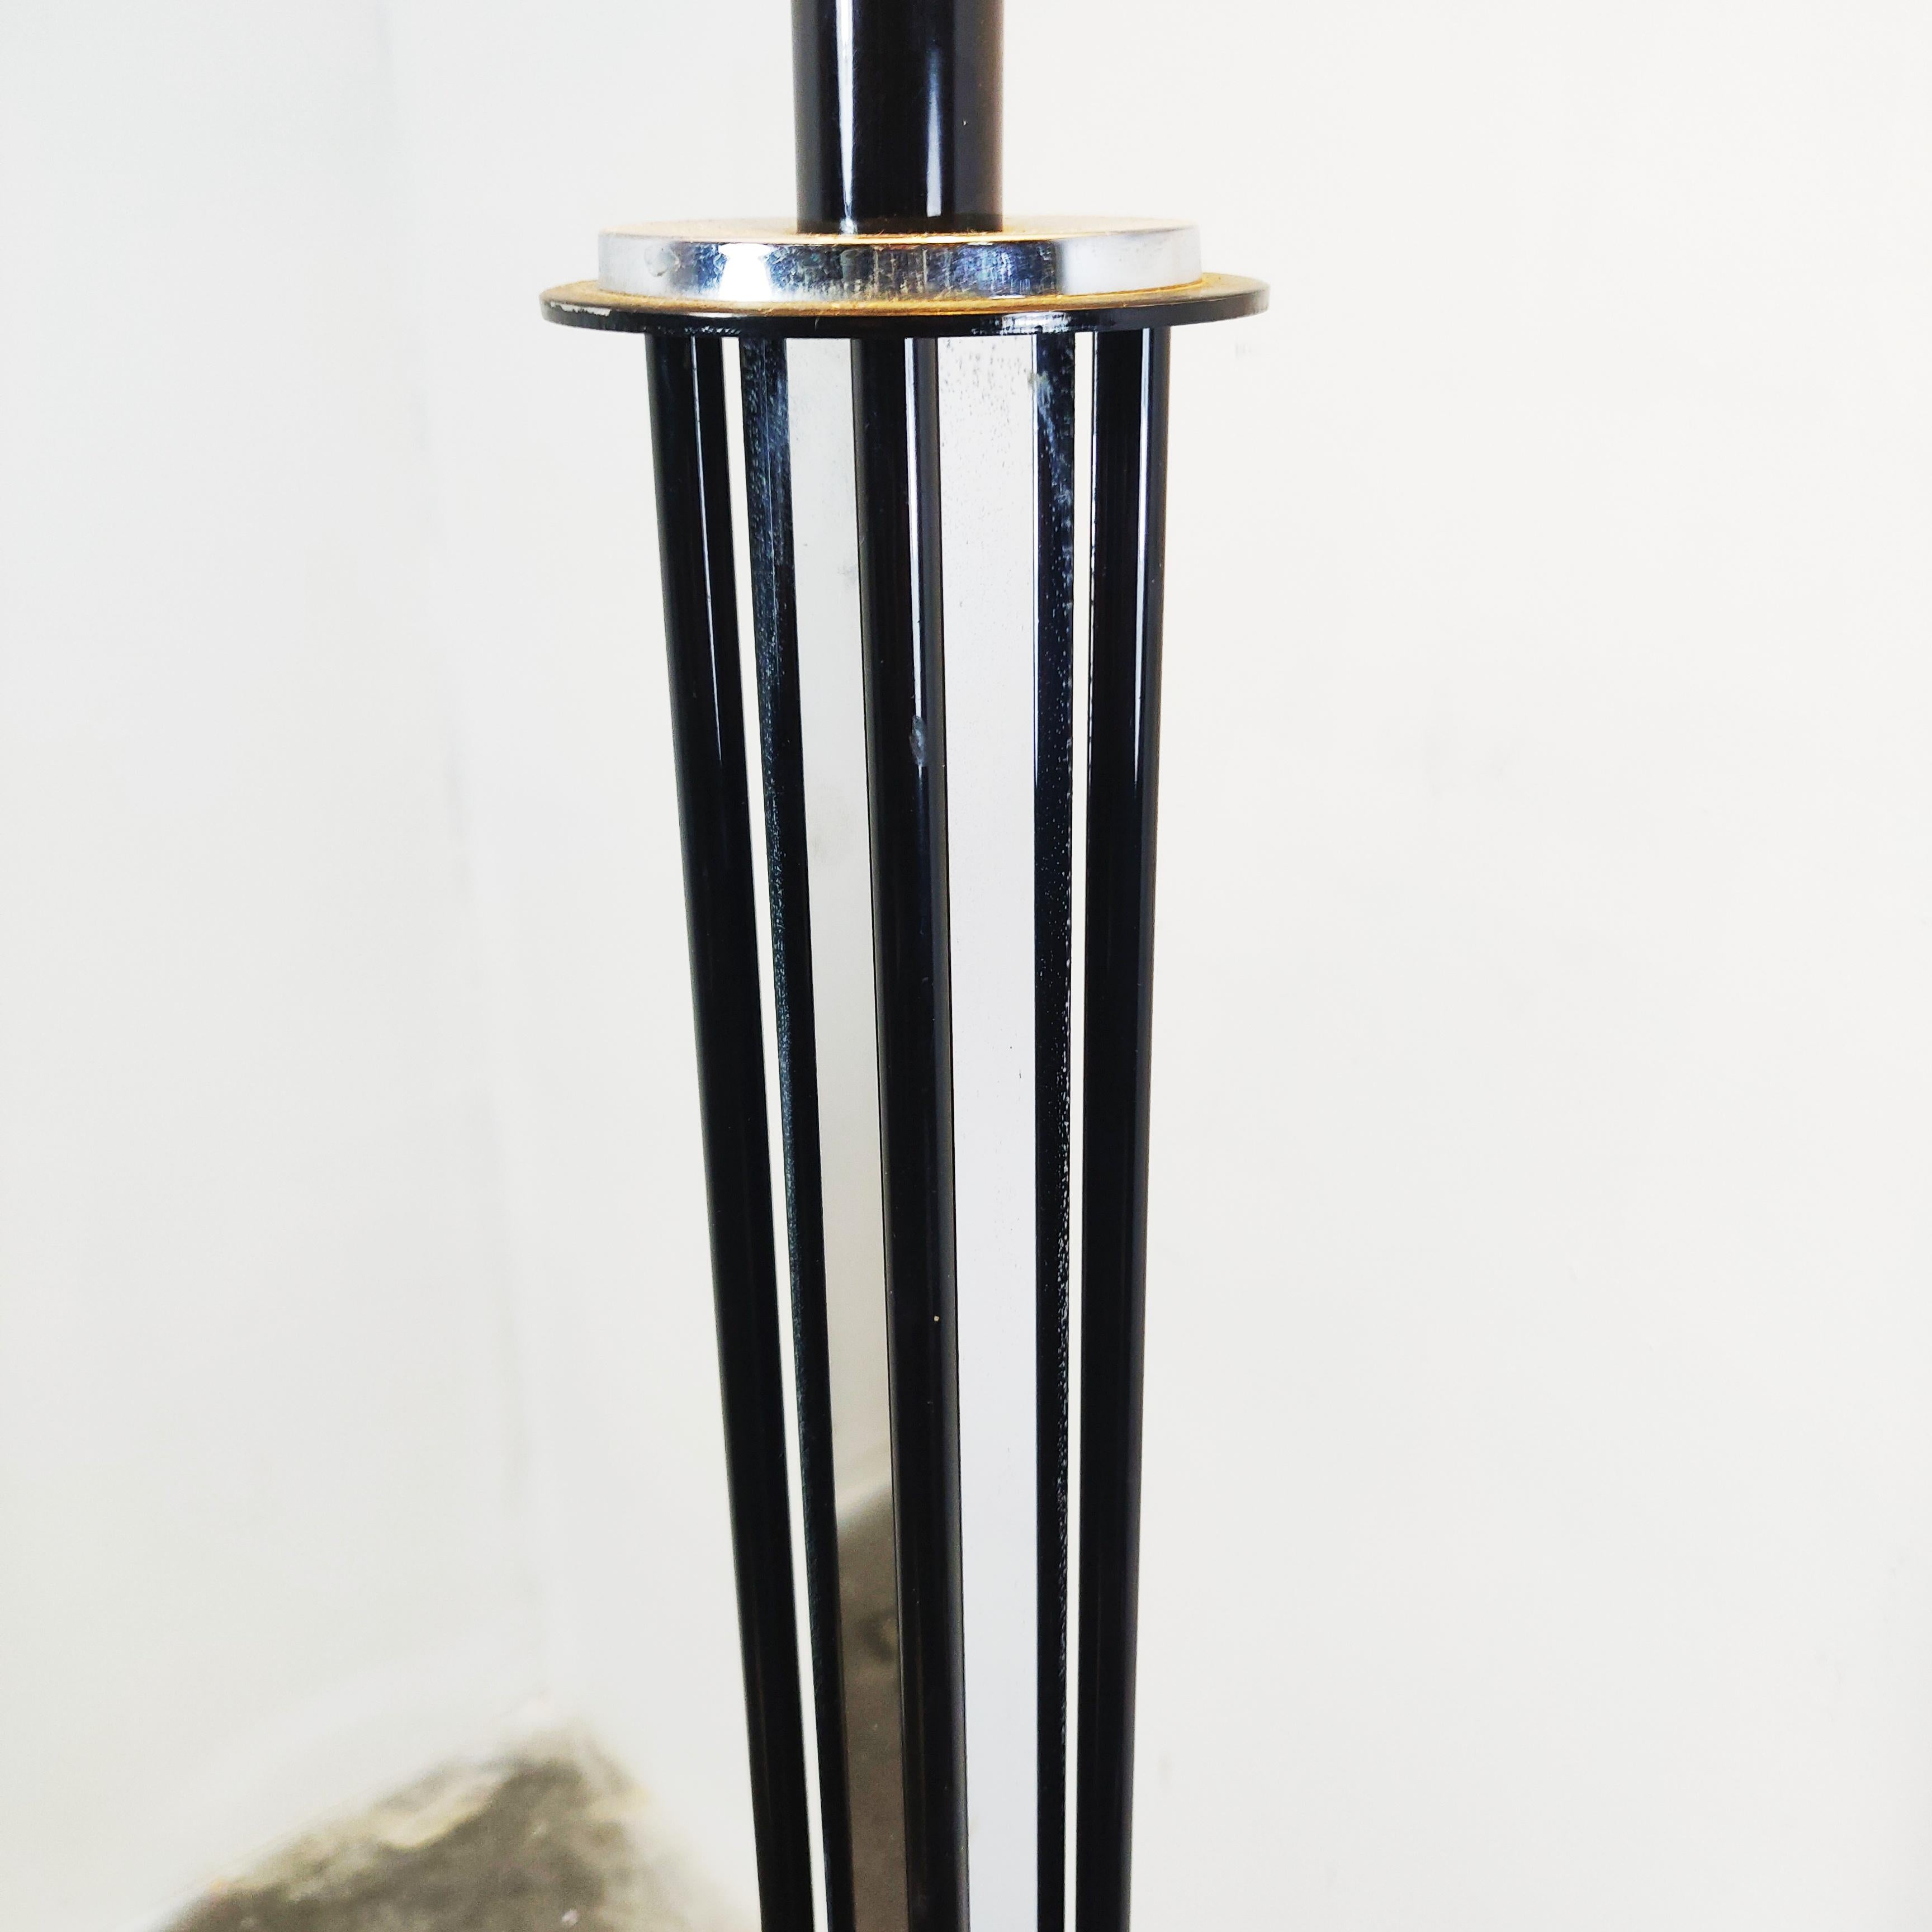 20th Century Hollywood Regency Floor Lamp in style of Willy Rizzo. For Sale 2